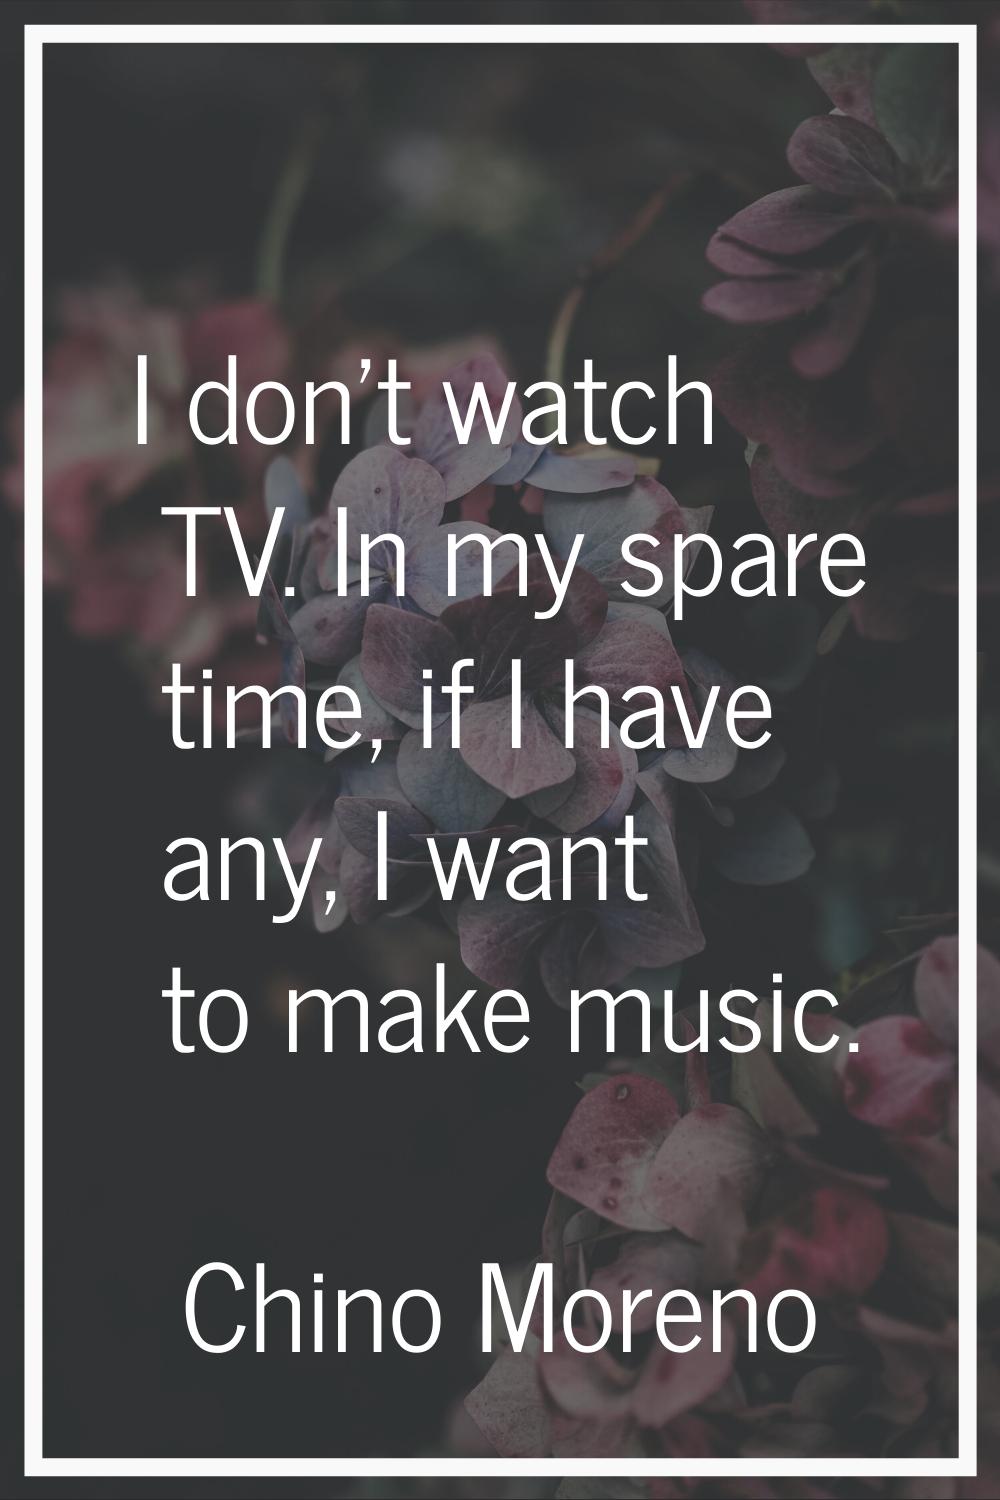 I don't watch TV. In my spare time, if I have any, I want to make music.